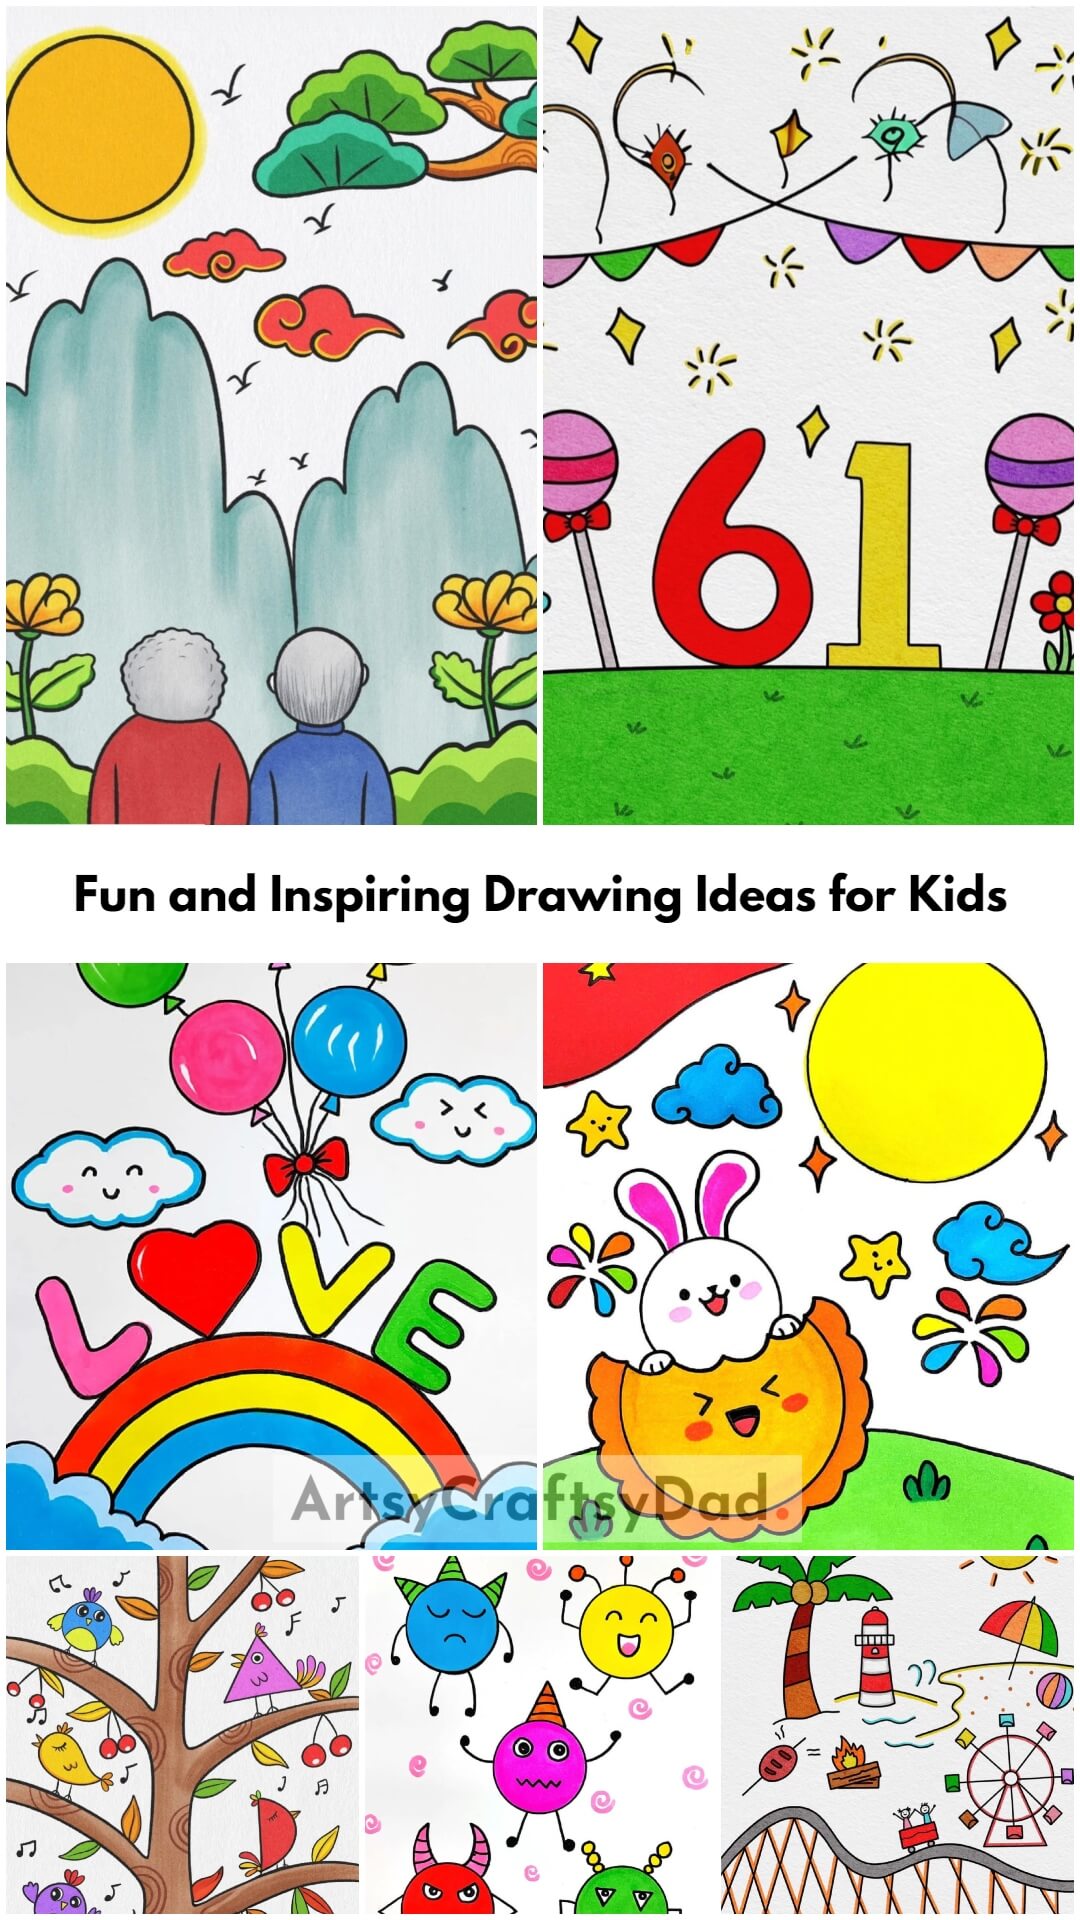 Fun and Inspiring Drawing Ideas for Kids